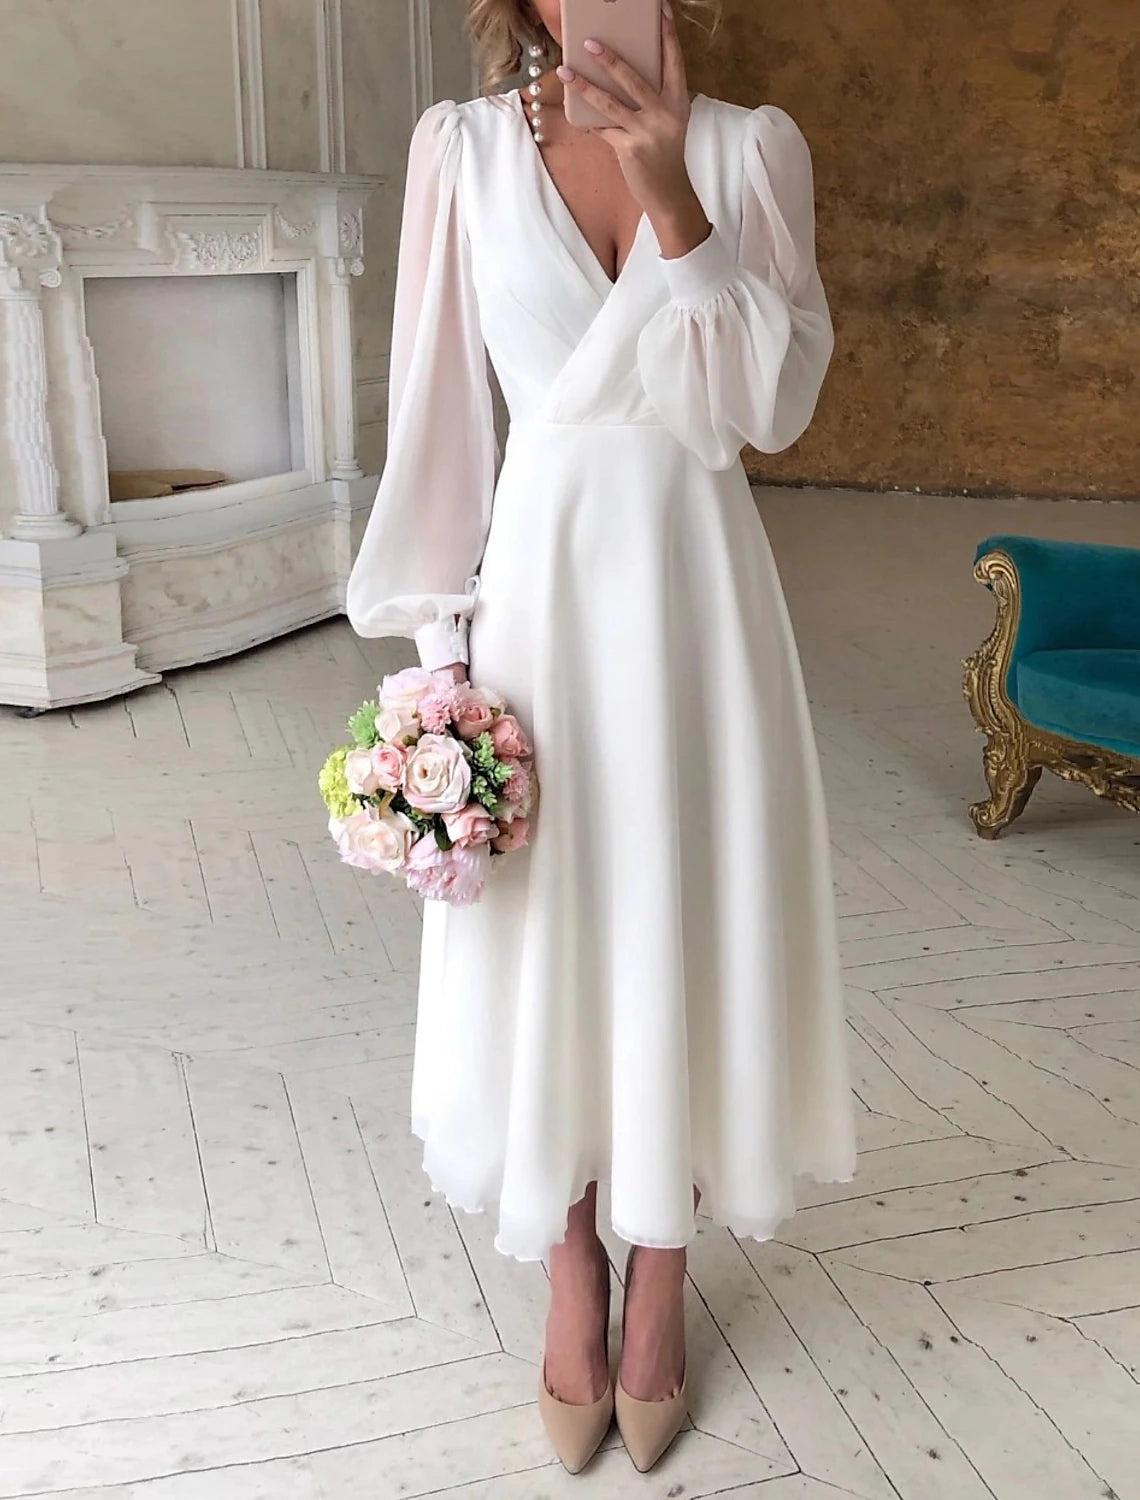 Bridal Shower Little White Dresses Wedding Dresses Ankle Length A-Line Long Sleeve V Neck Chiffon With Solid Color